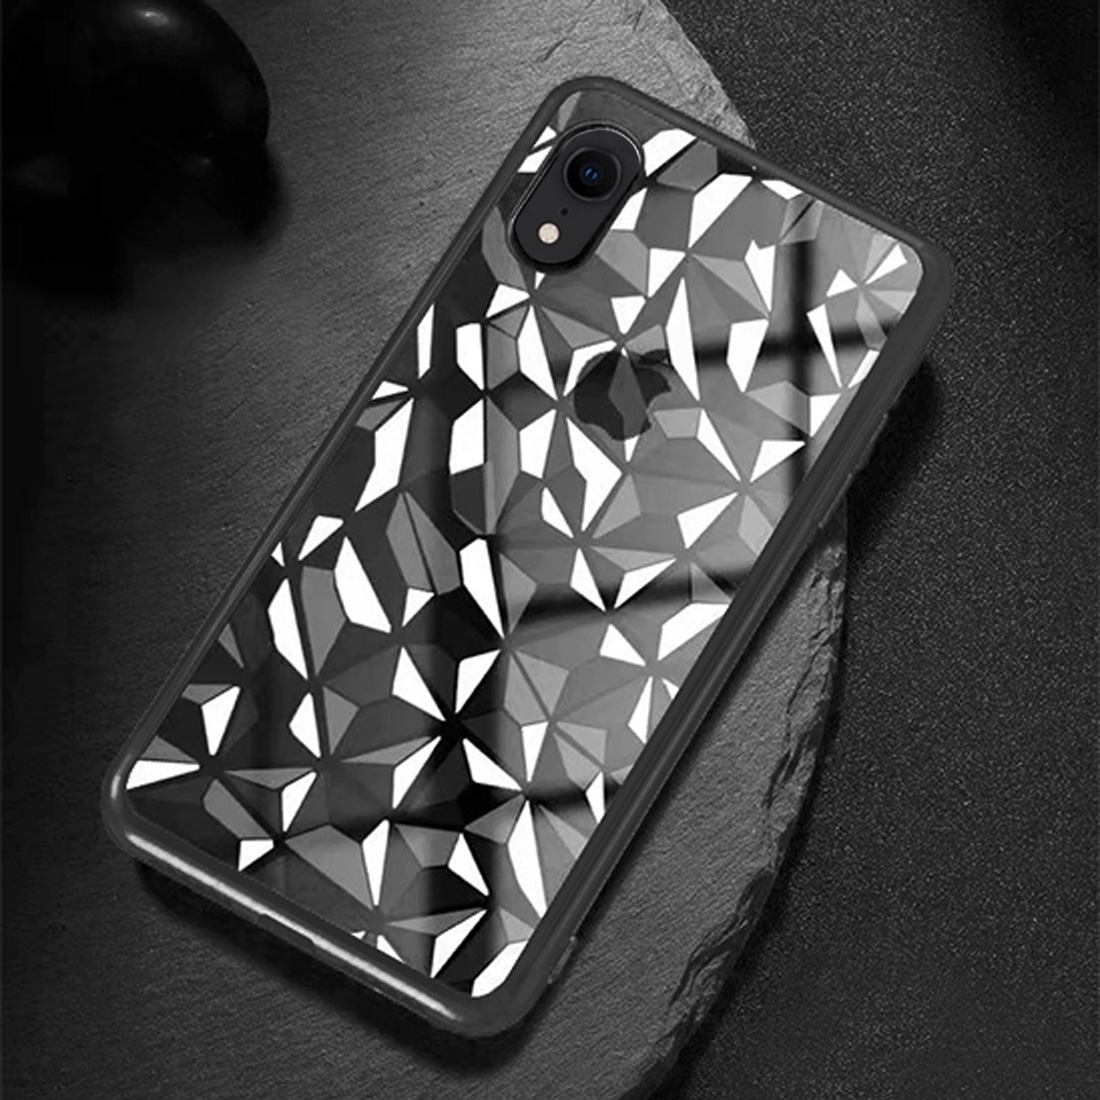 Diamond Texture Electroplating TPU Case For iPhone XR 6.1 inch,Black